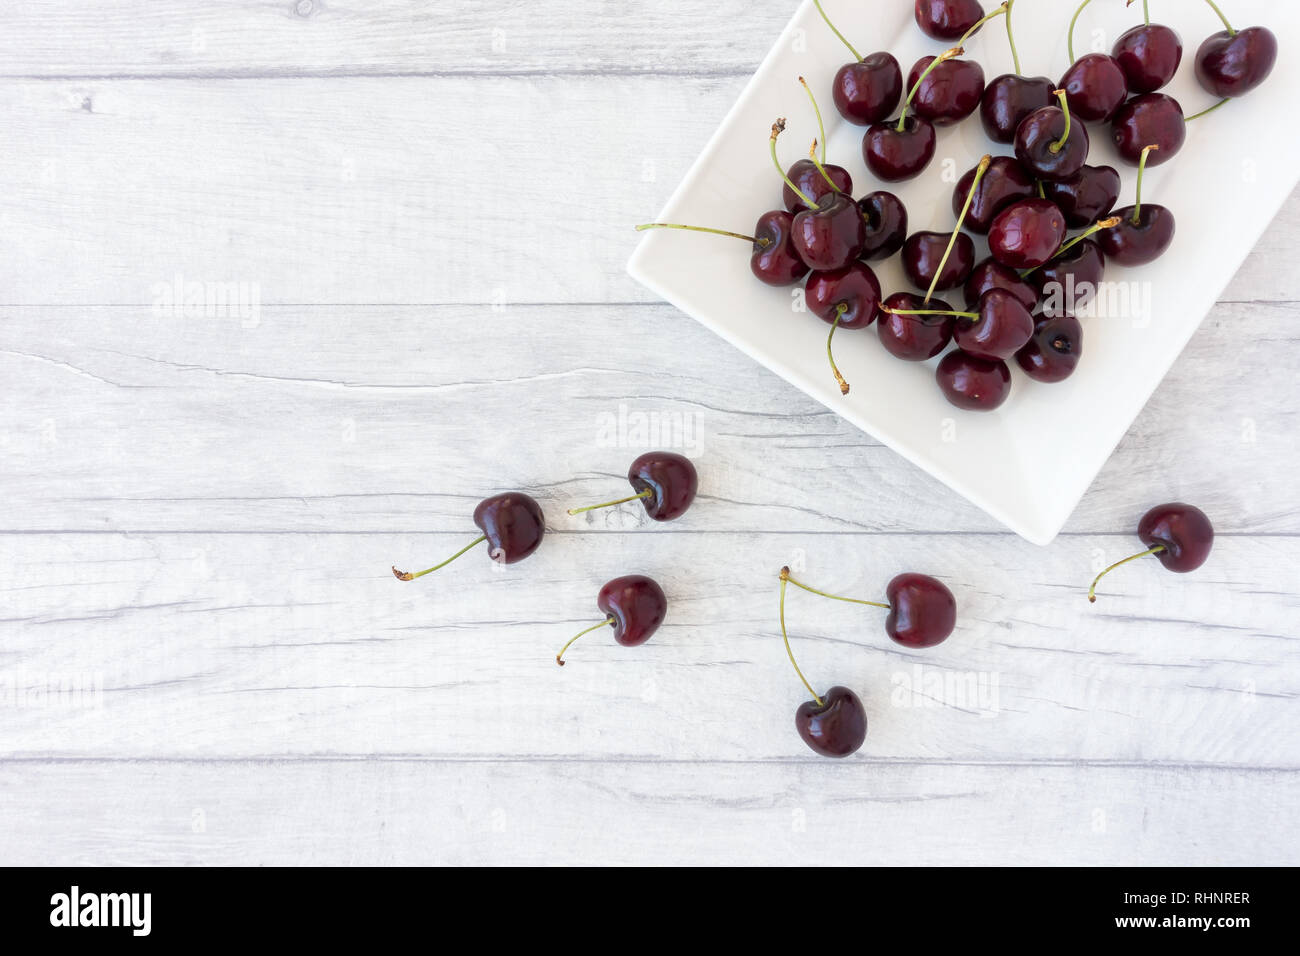 Cherries on a white plate and scattered on gray wood panel background. Top view and lots of copy space. Stock Photo